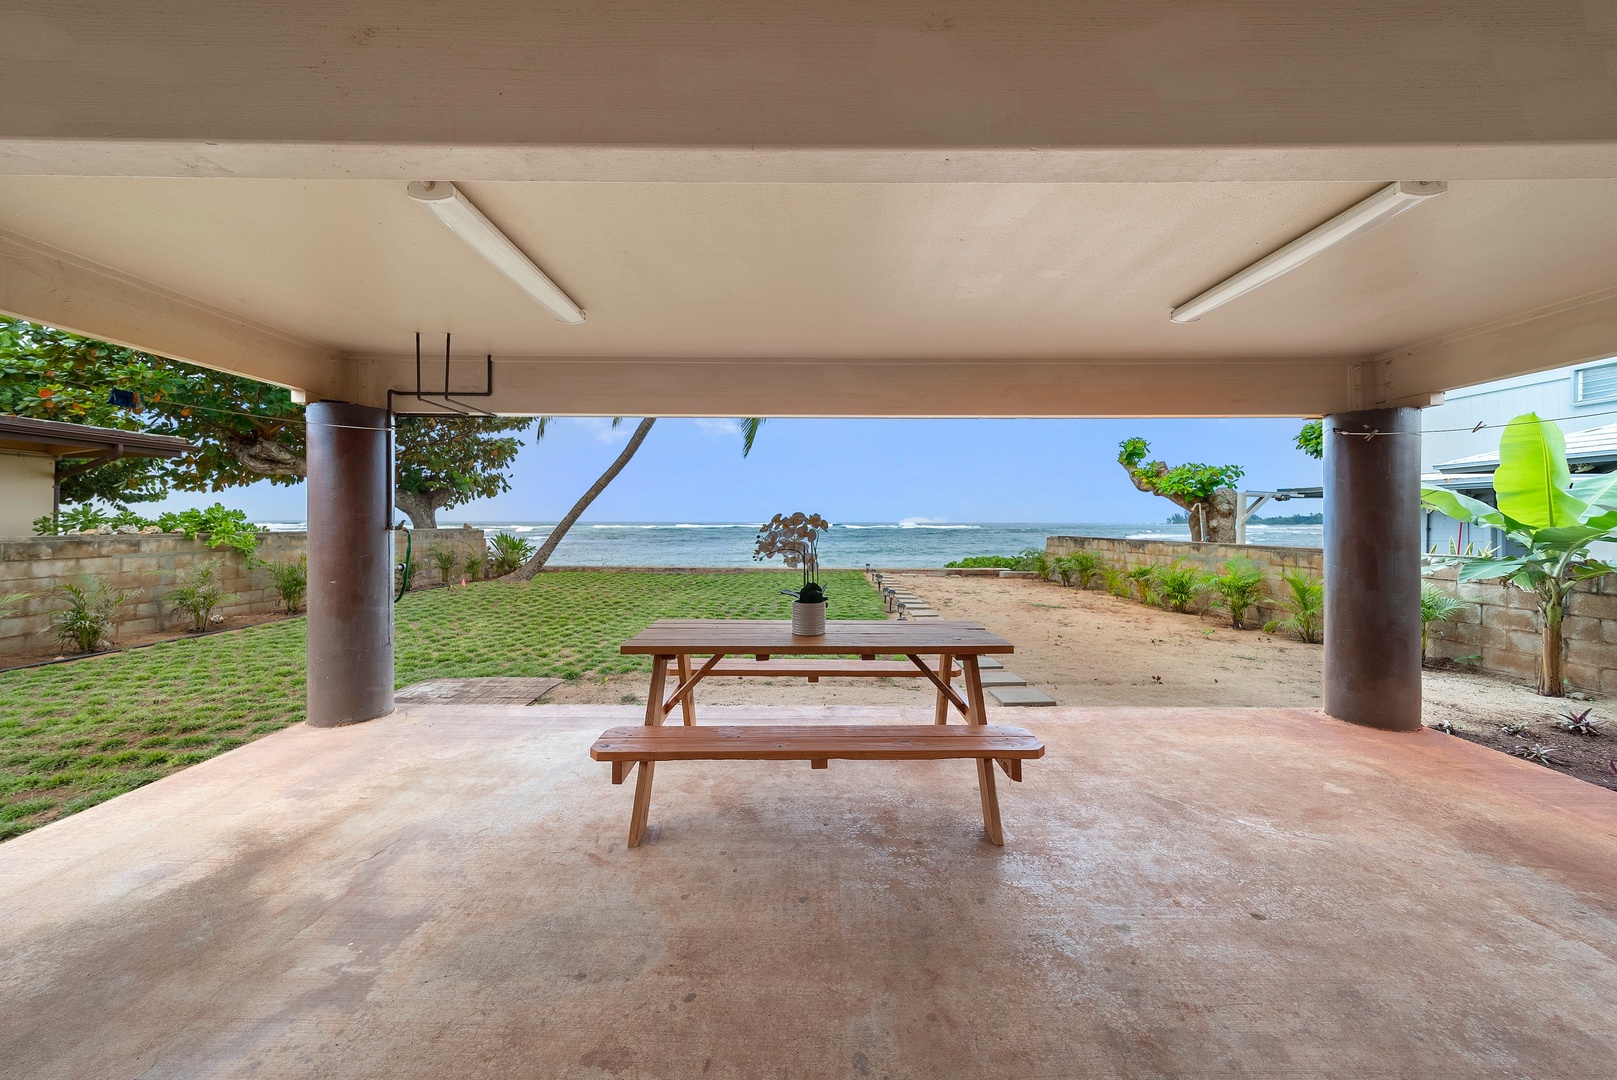 Haleiwa Vacation Rentals, Pikai Hale - Enjoy an al fresco dinner at the picnic table overlooking the ocean.